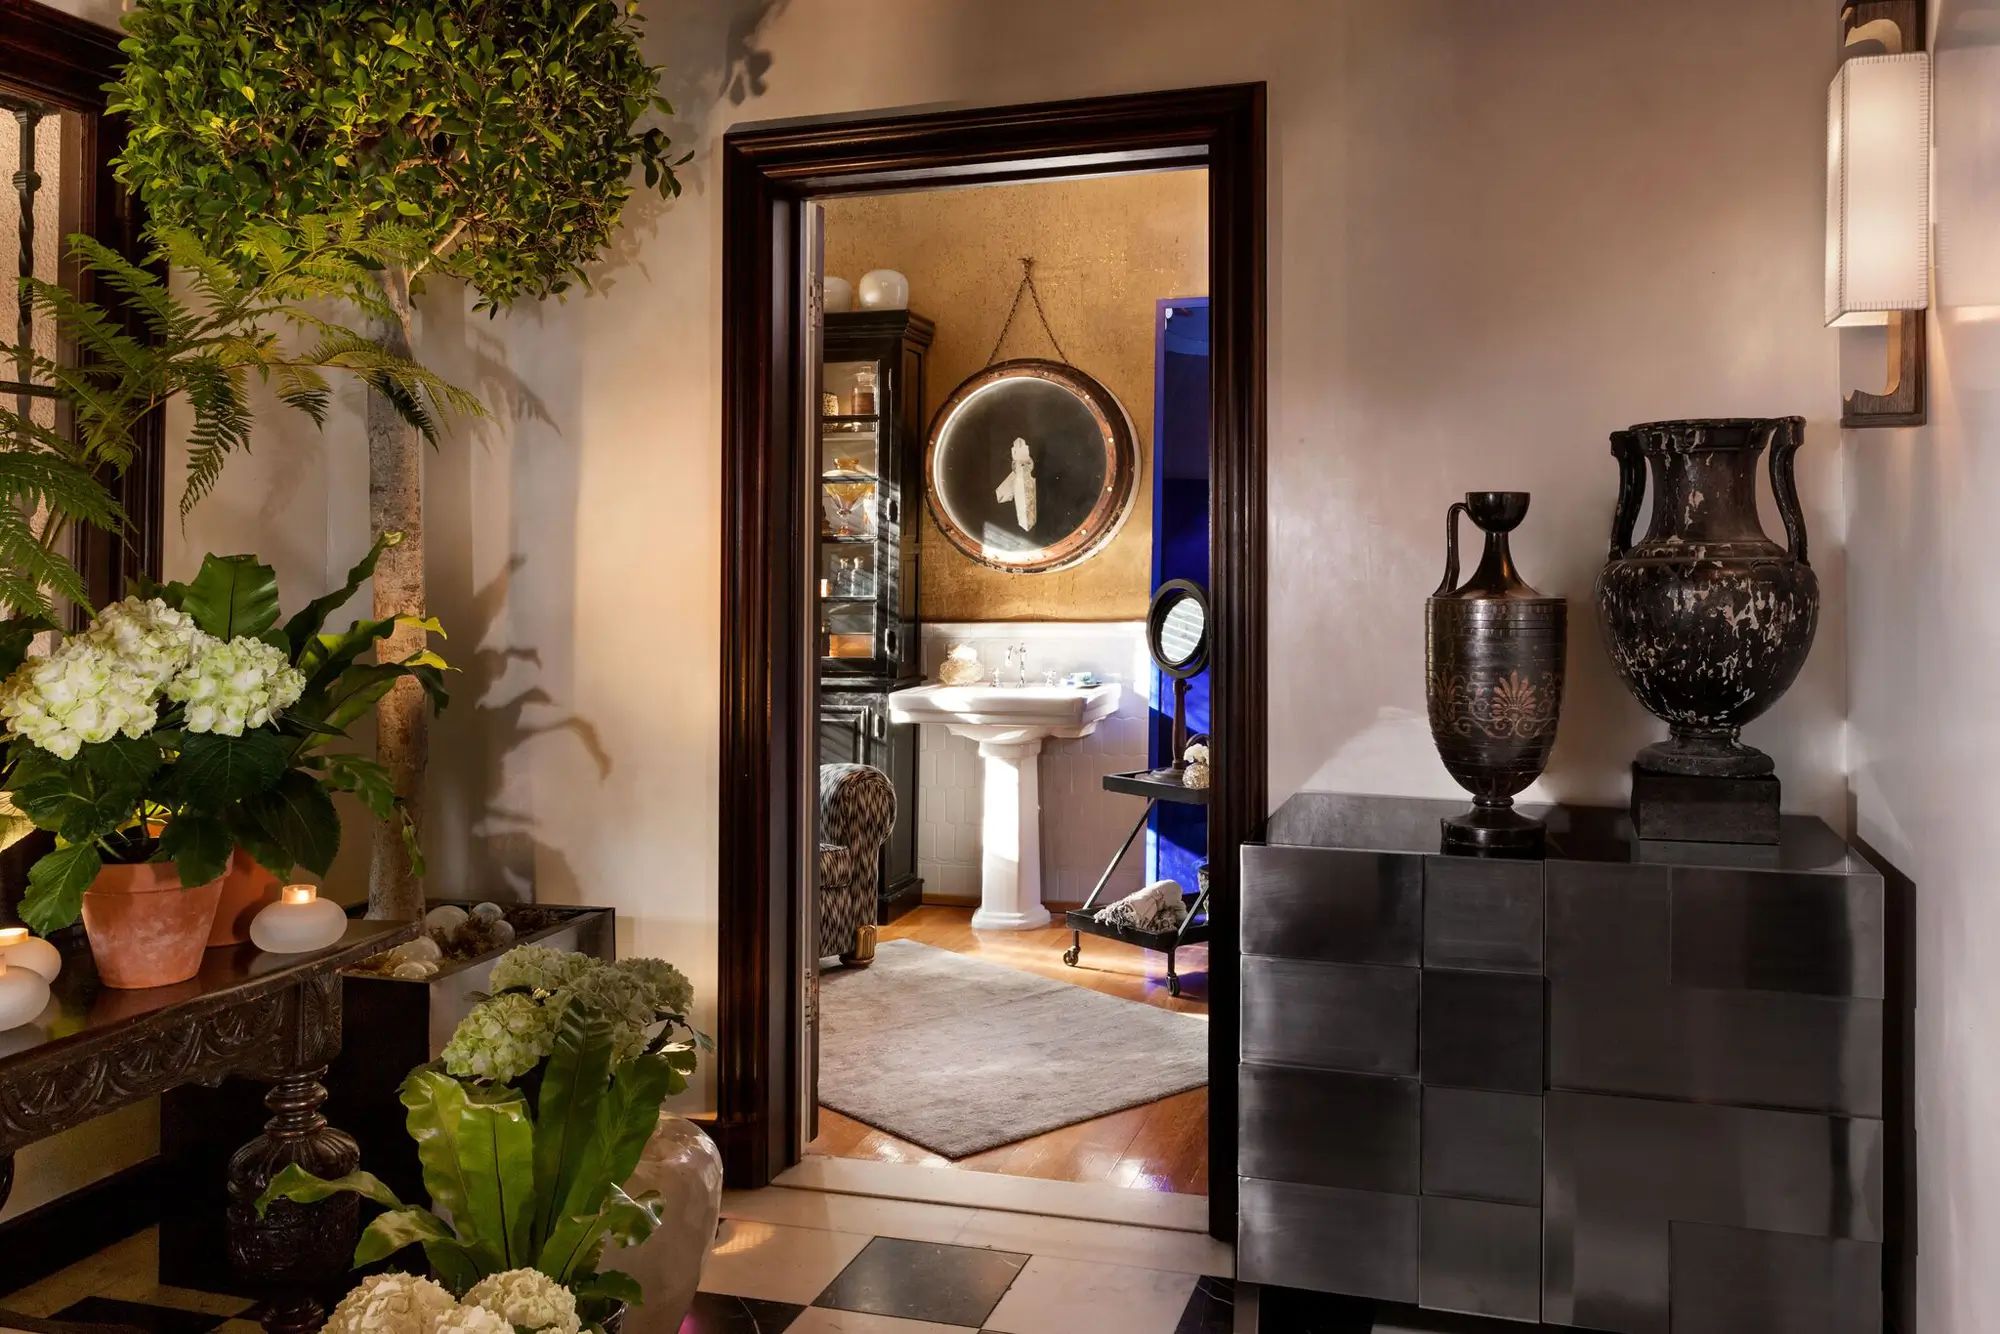 A stunning view through to the bathroom within the Wattles Showcase House